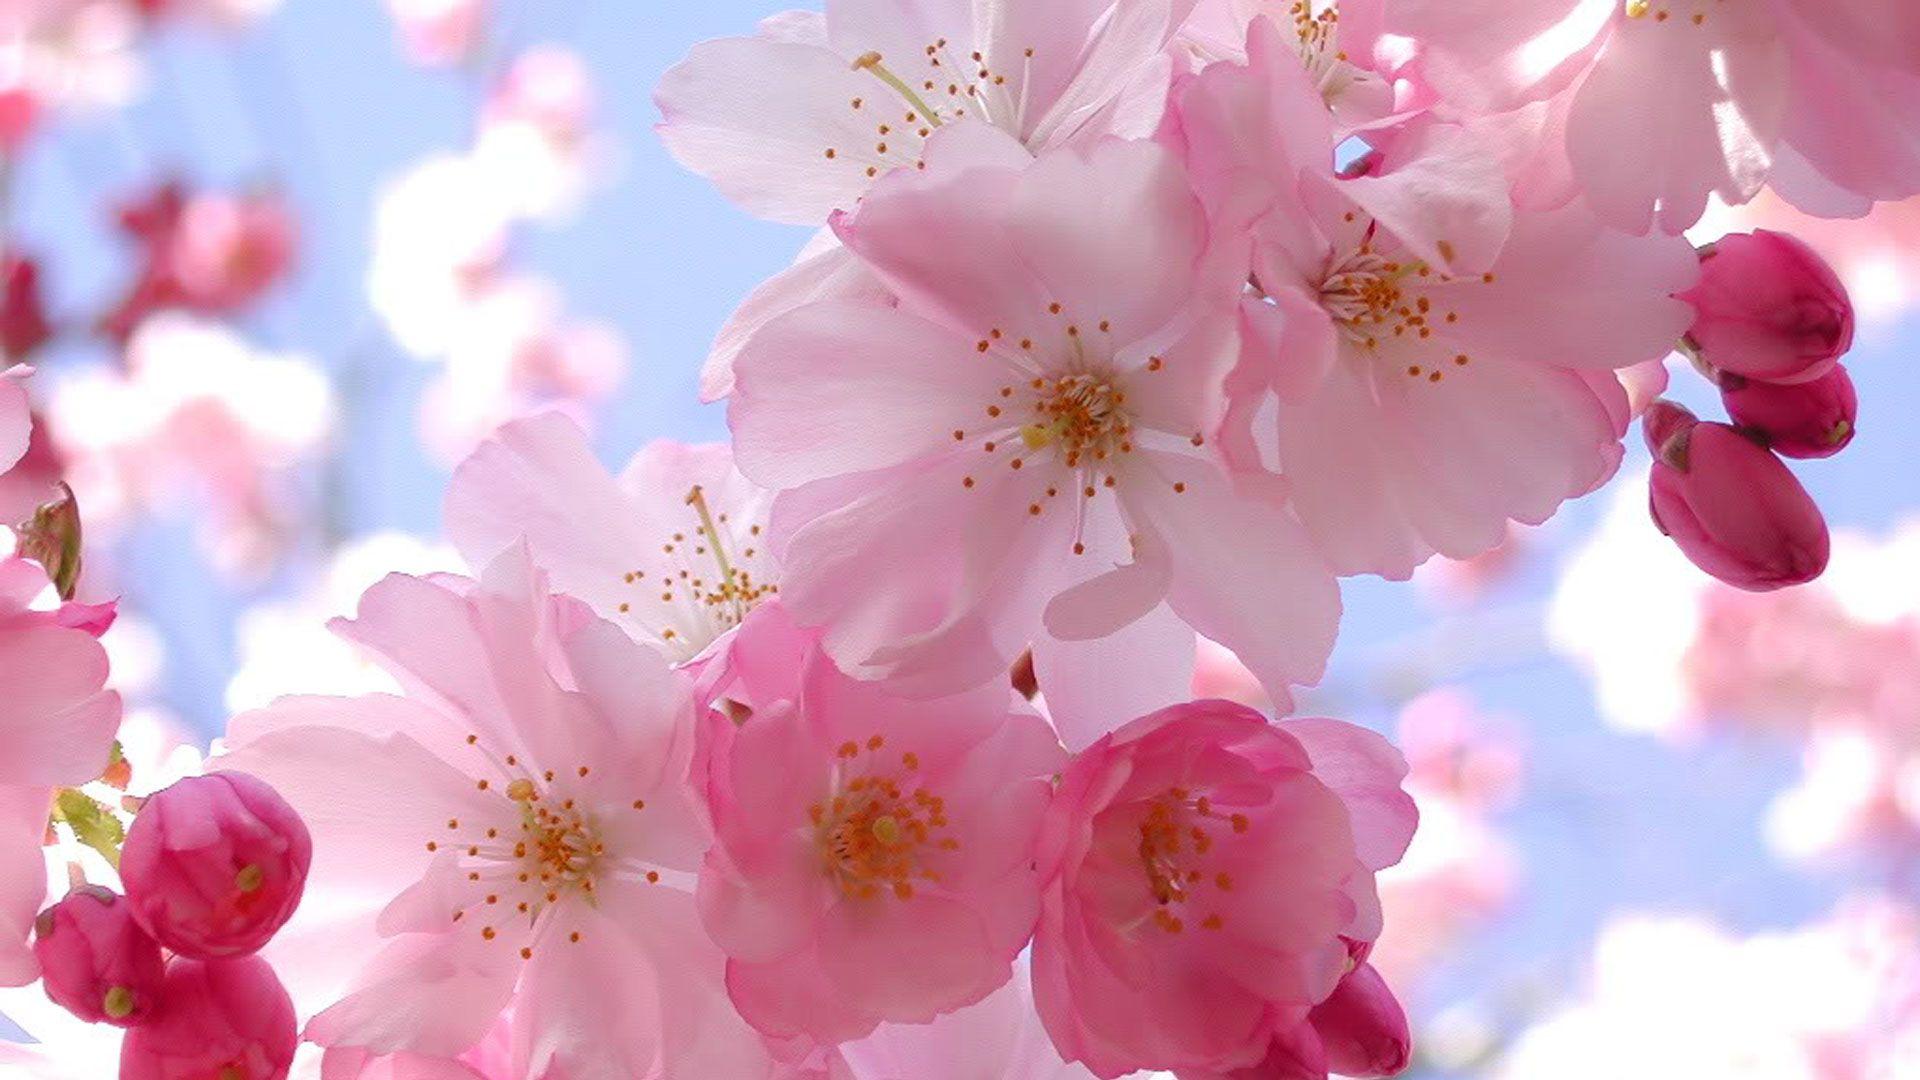 Cherry Blossom Photos Download The BEST Free Cherry Blossom Stock Photos   HD Images